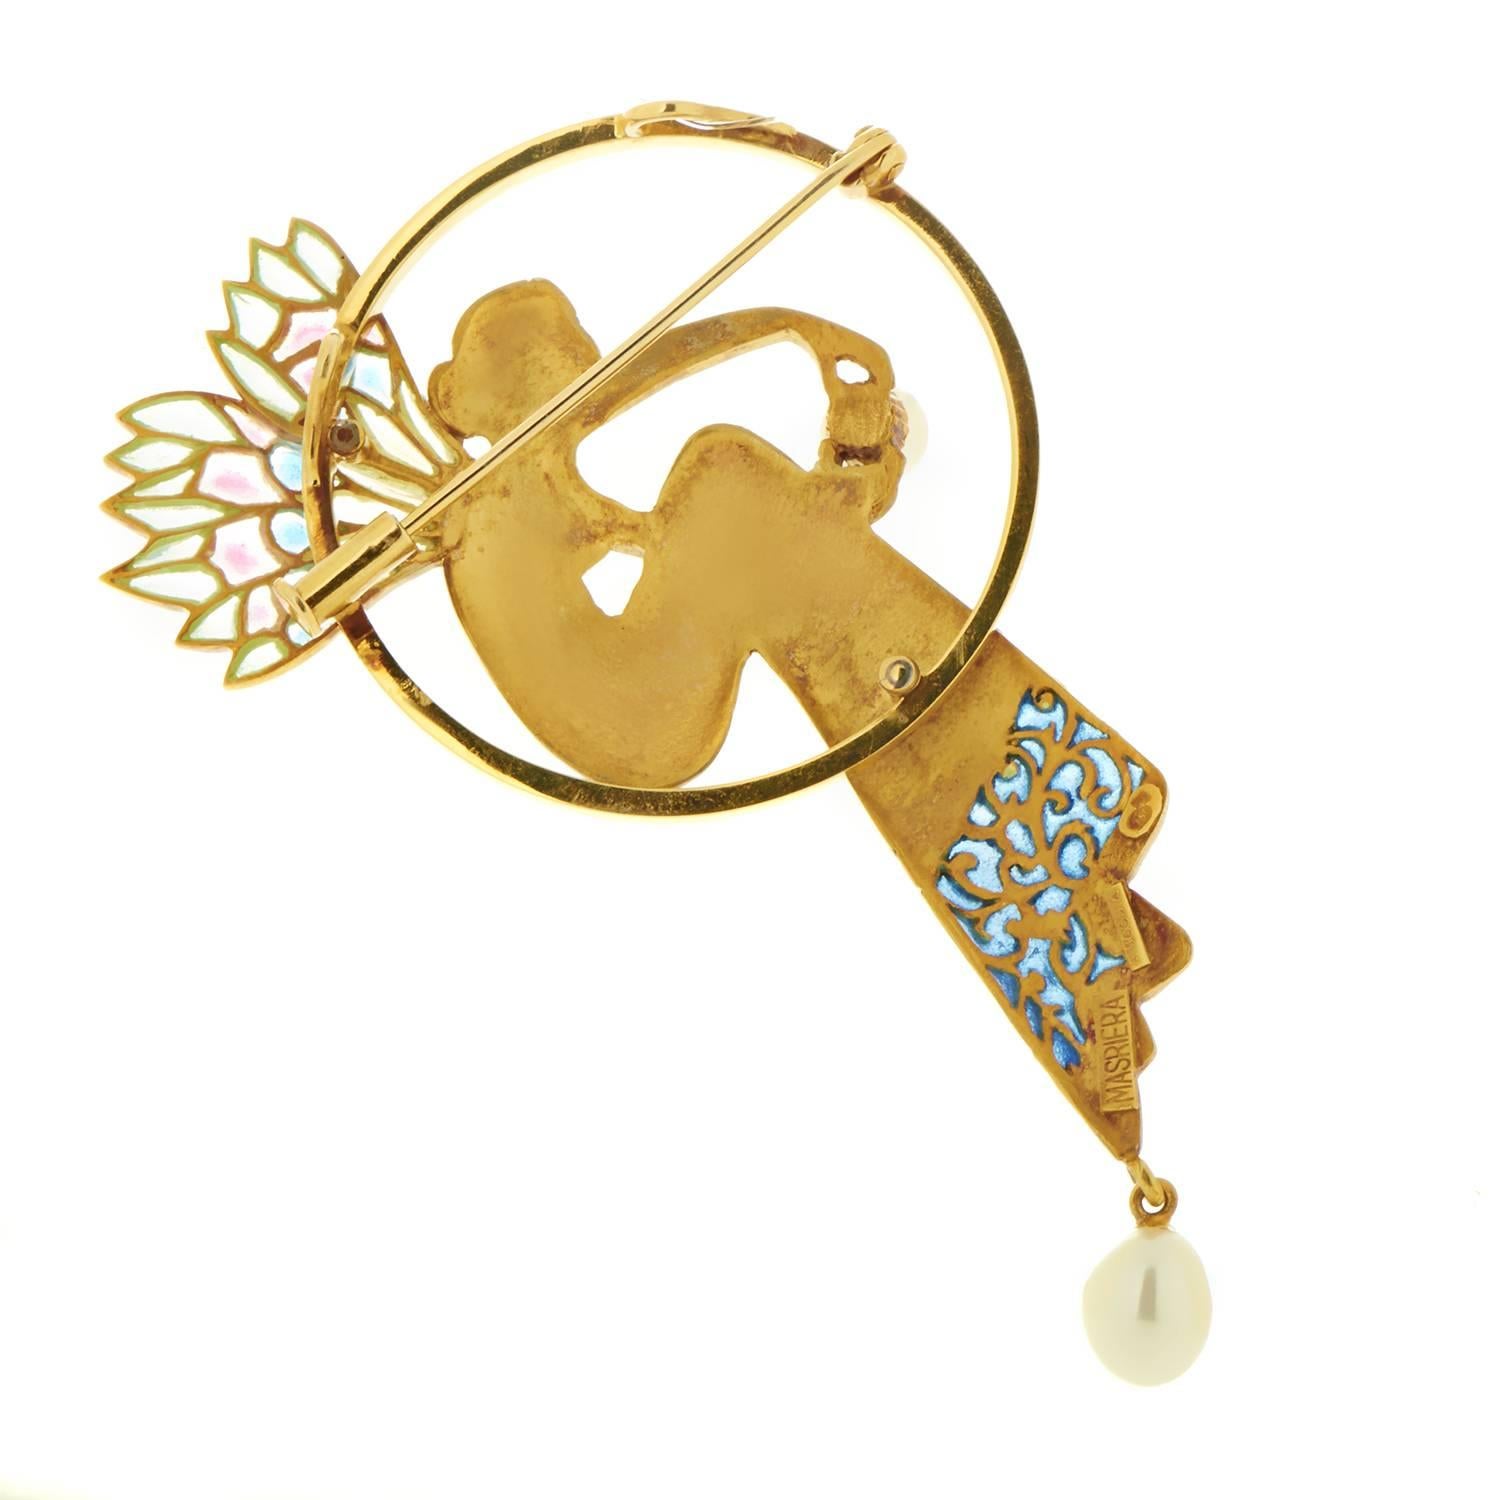 Fabulously realistic and expertly crafted, this magnificent brooch from Masriera is made of radiant 18K yellow gold in the shape of a beautiful fairy, with an angelic pearl in her hands and colorful enamel upon her graceful wings and dress.